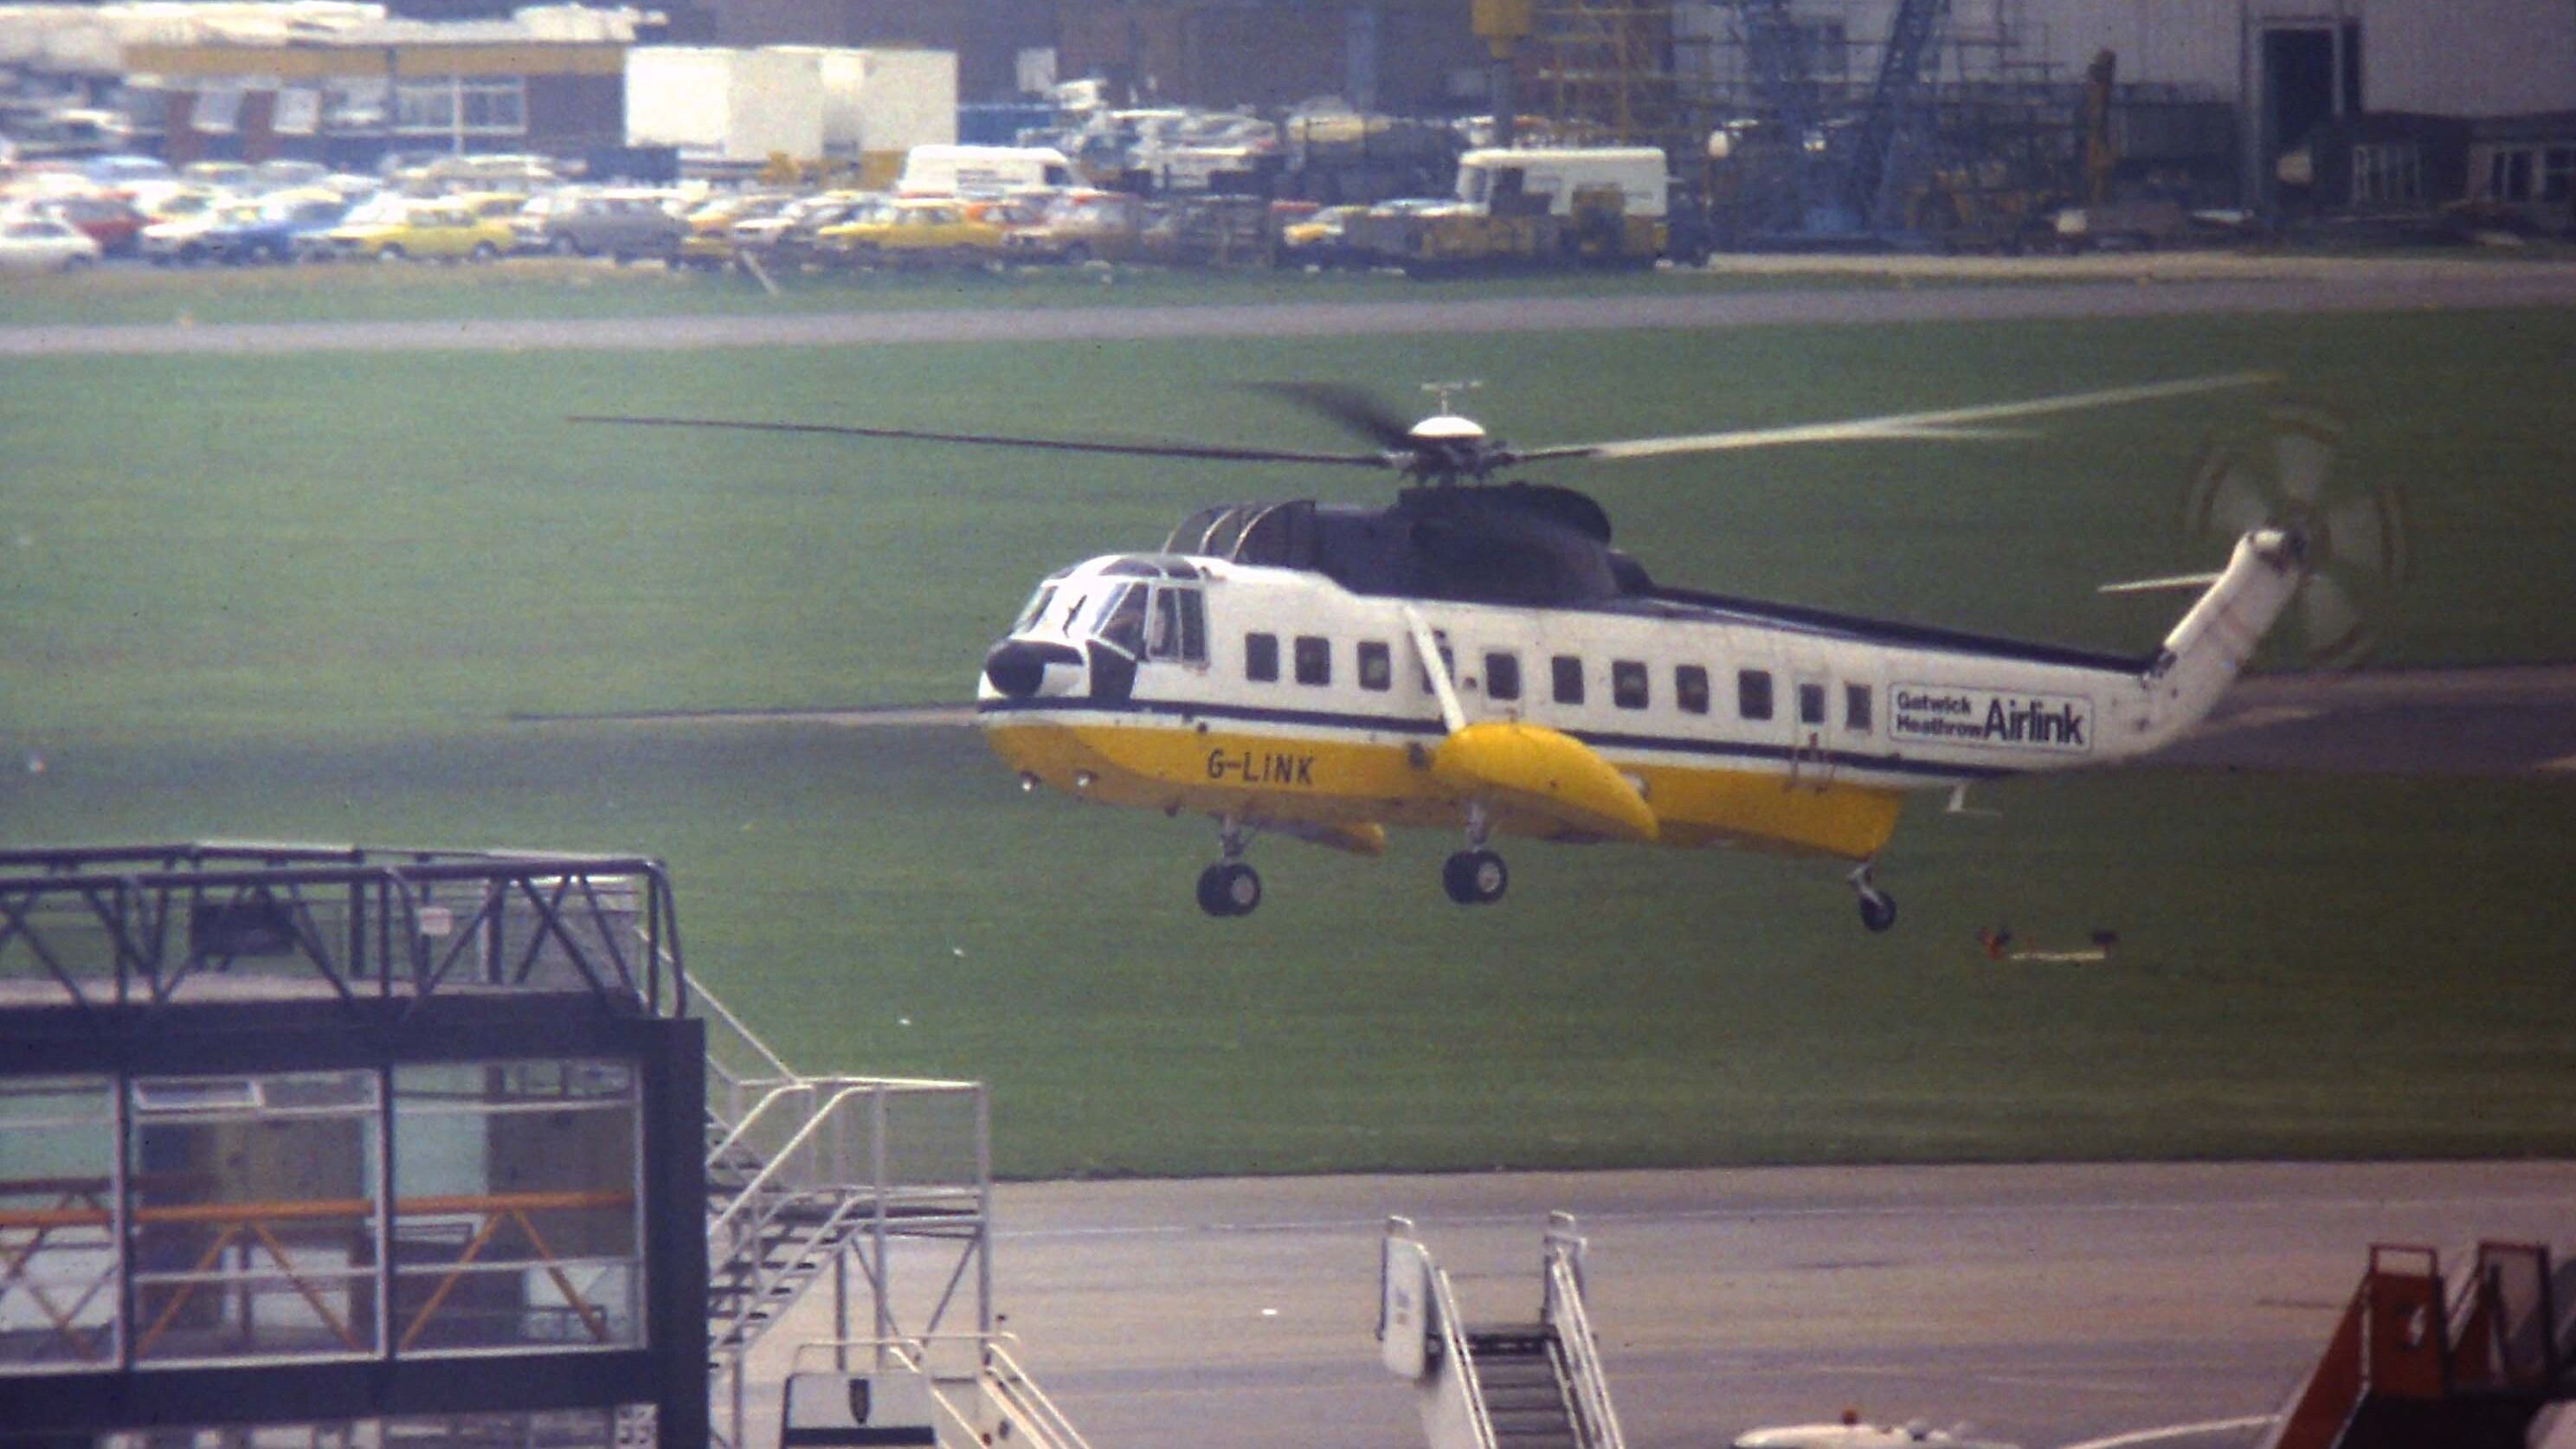 Gatwick - Heathrow's 'Airlink' shuttle in the form of Sikorsky S-61N G-LINK caught arriving by the old South Pier at Gatwick sometime in the mid 1980's.   